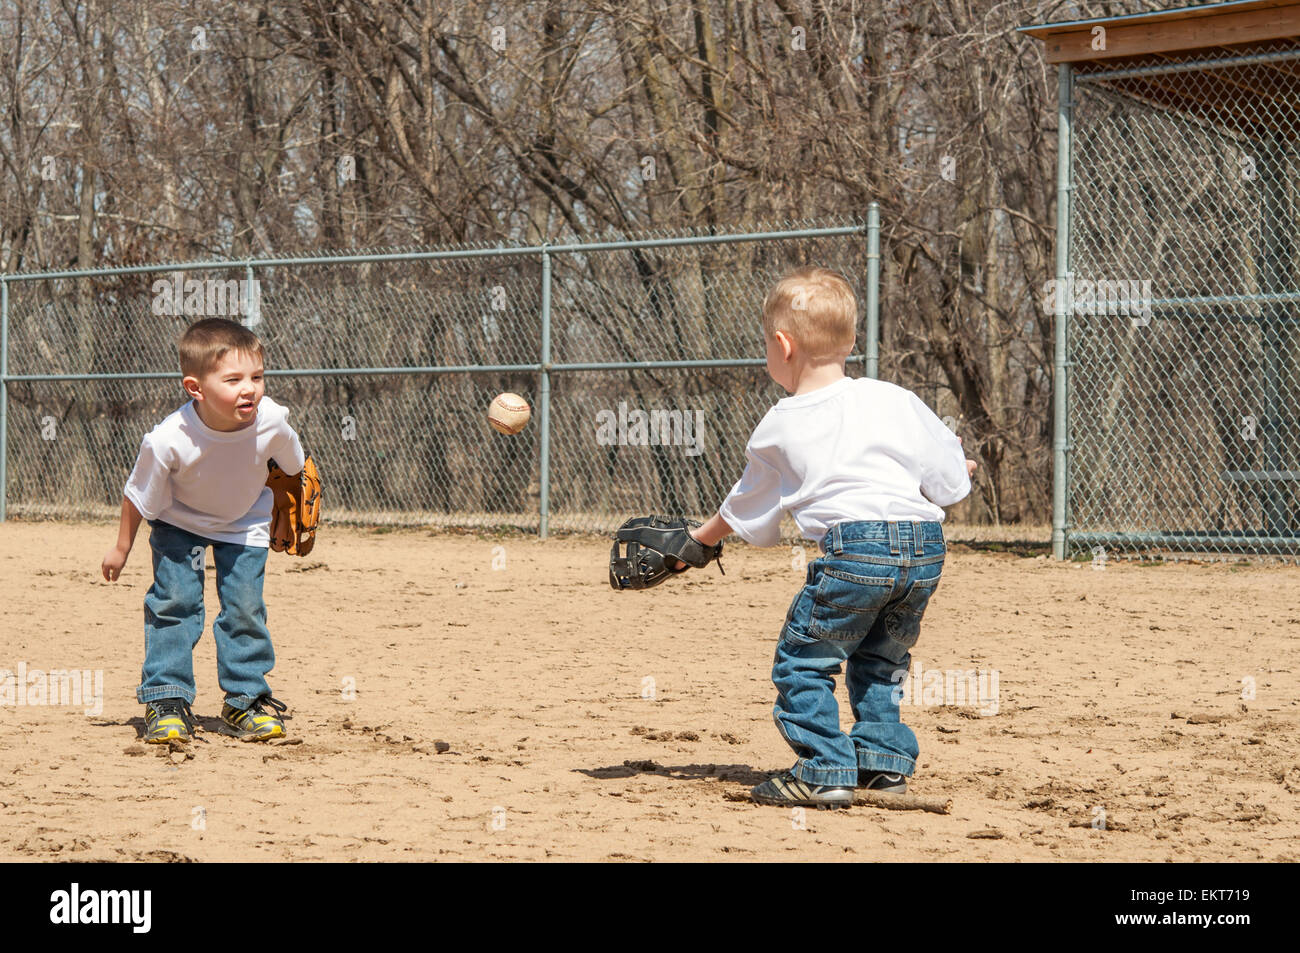 Two boys play catch throwing ball Stock Photo